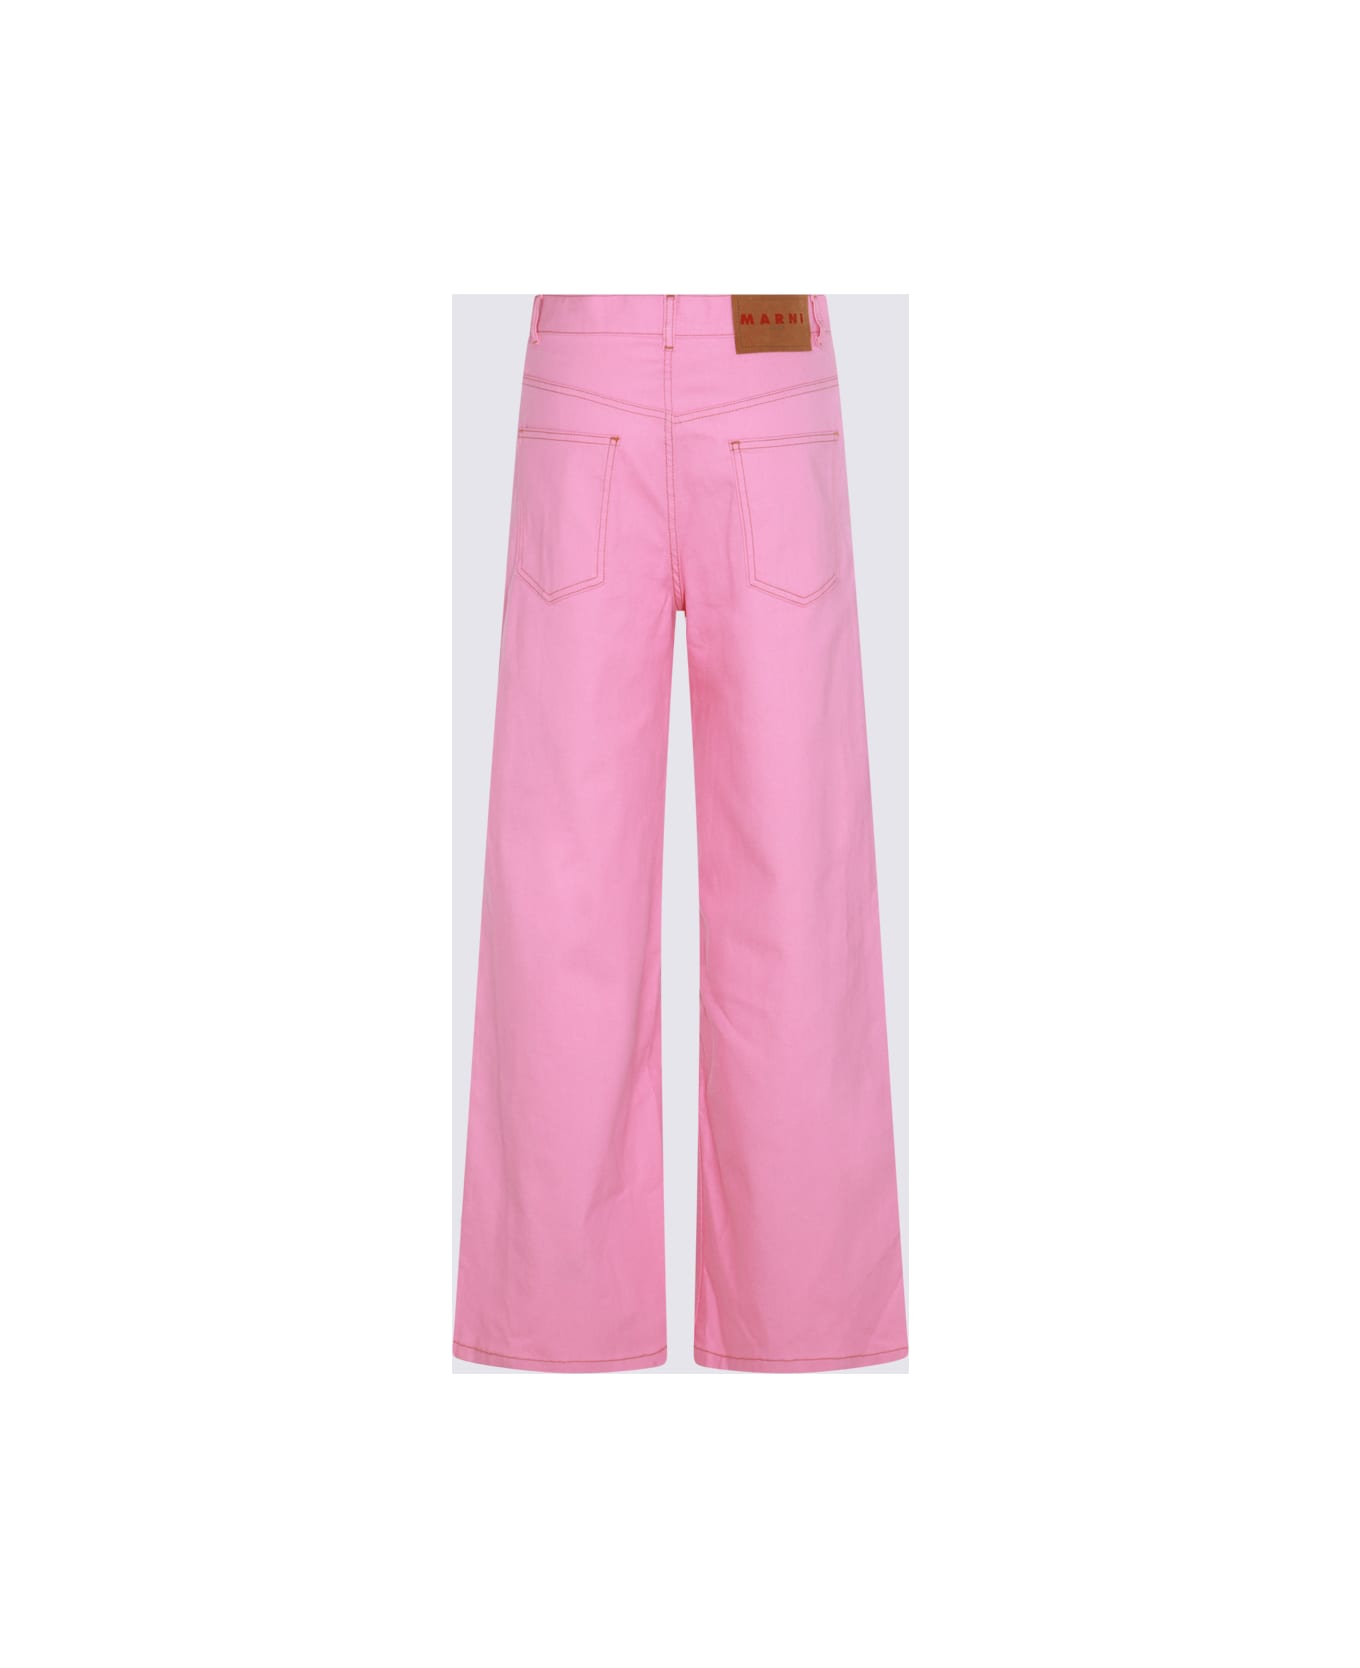 Marni Pink Cotton Jeans - PINK CLEMATIS ボトムス